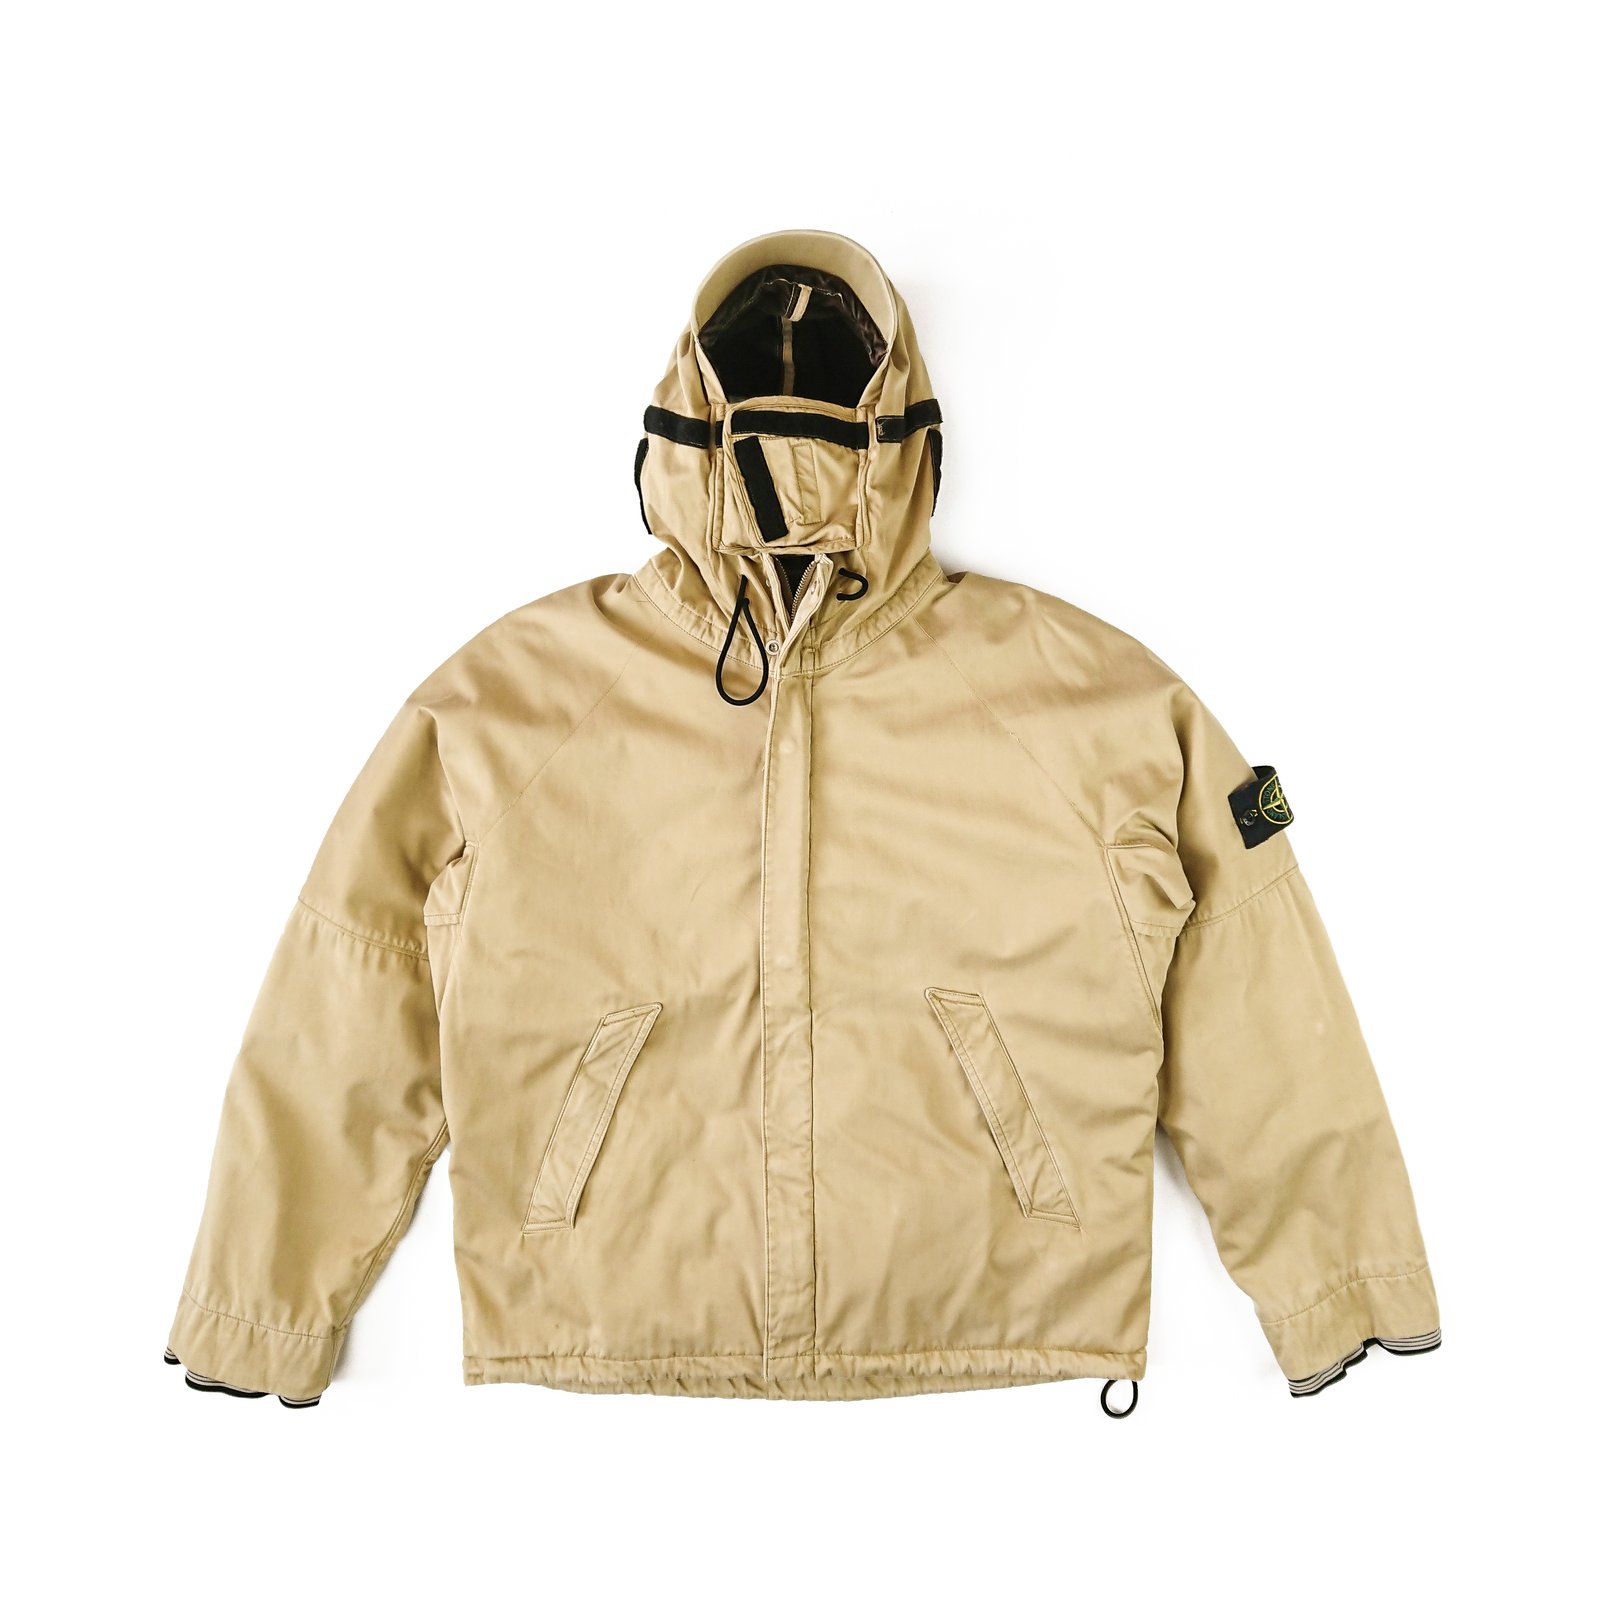 AW 2005 Stone Island 'Riot Mask' Jacket † Ruder Than The Rest